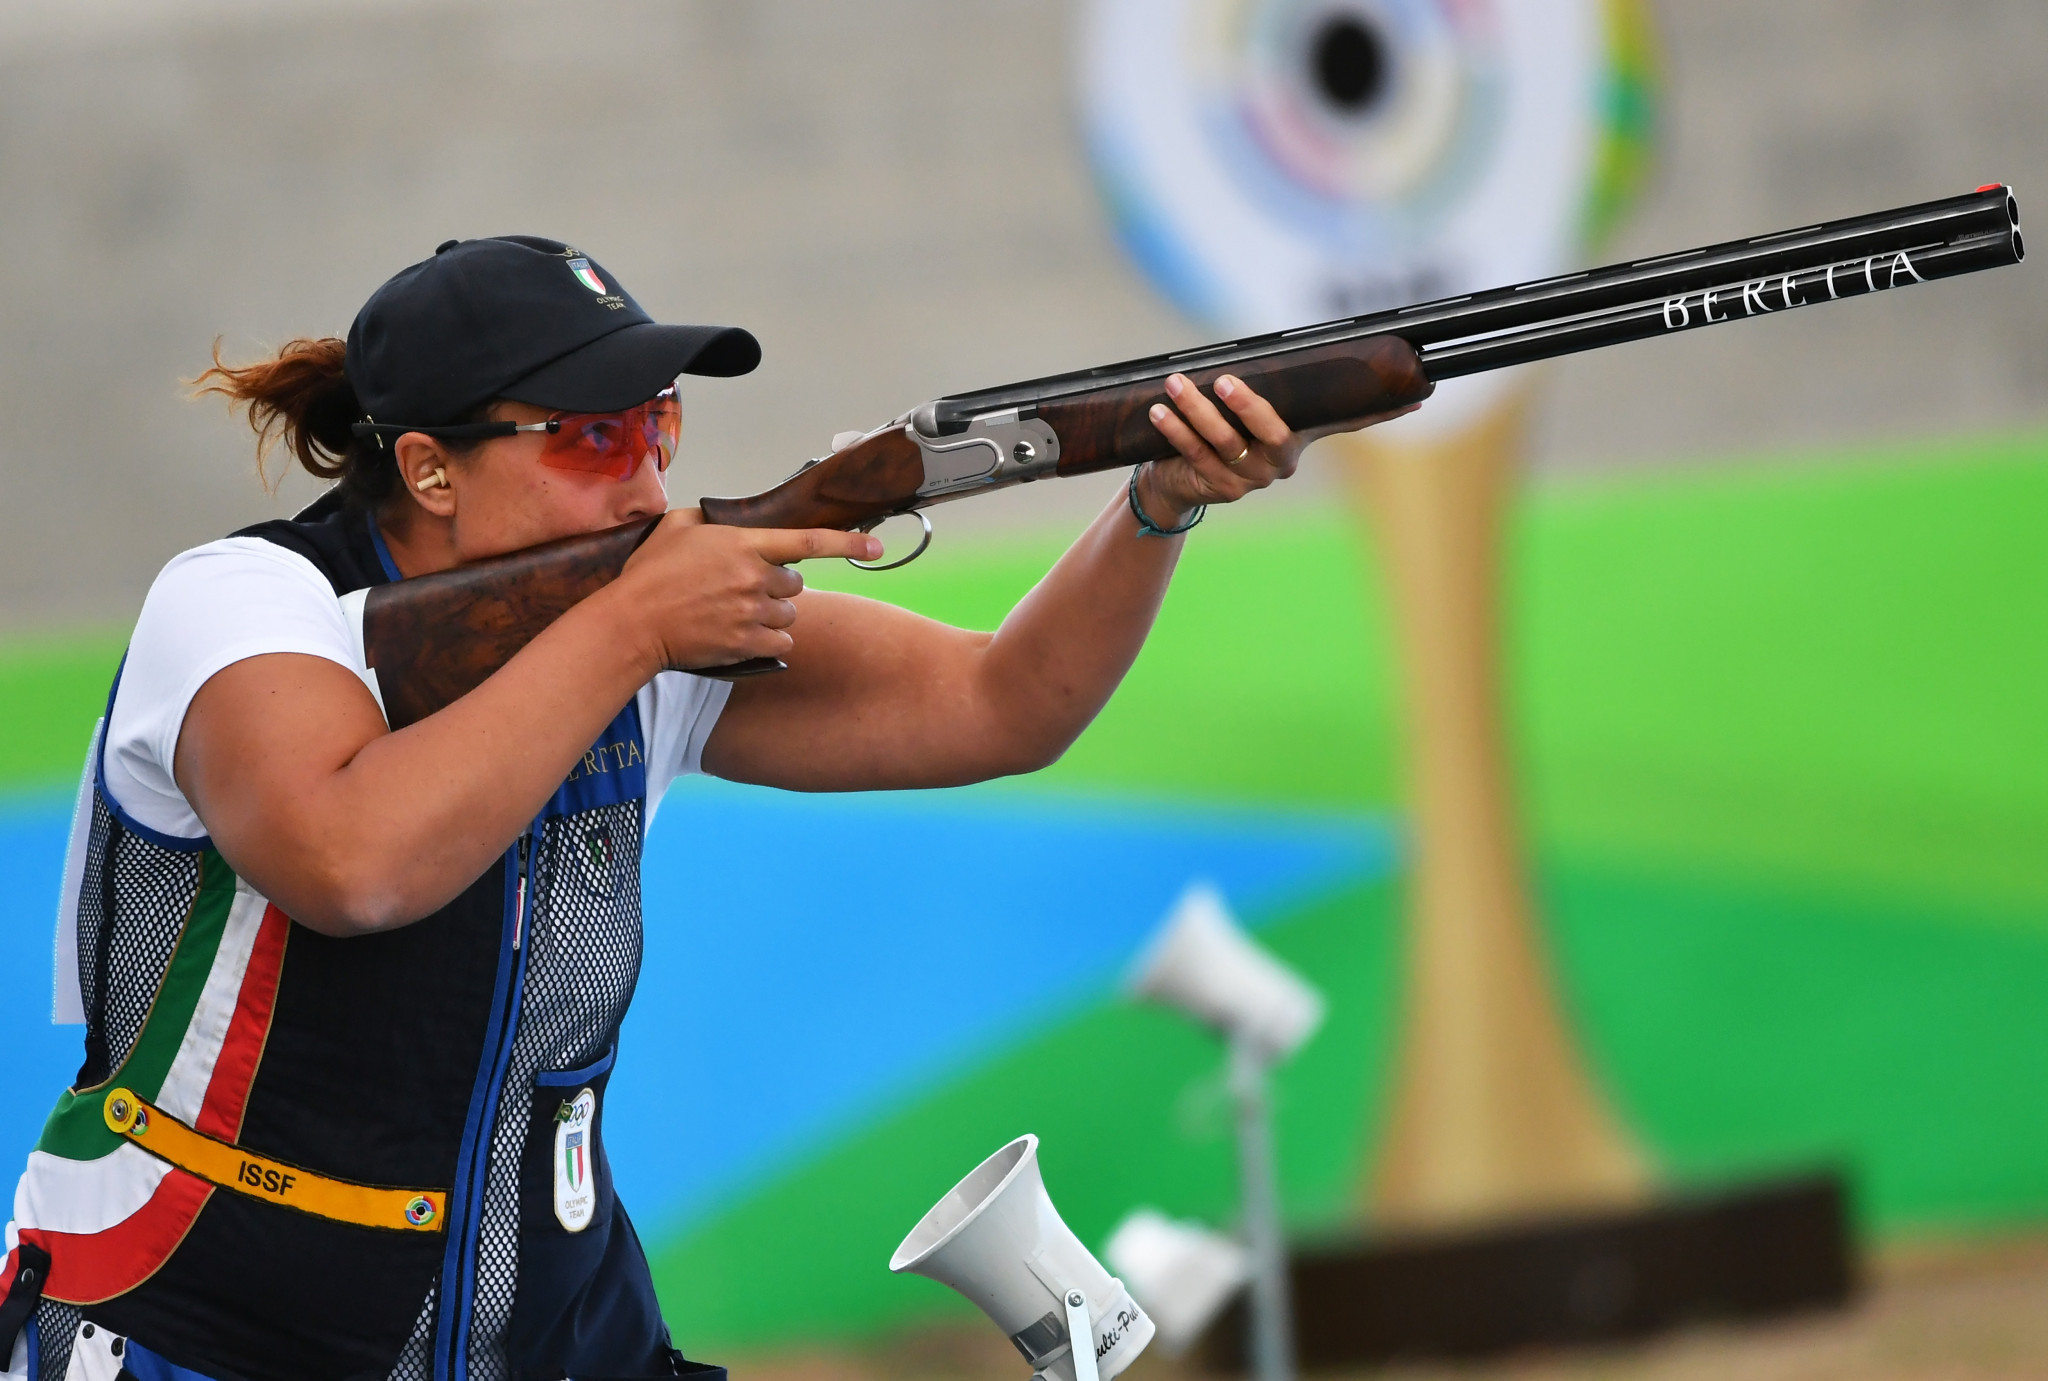 Olympic champion Diana Bacosi of Italy was third in women's skeet qualifying at the ISSF Shotgun World Cup ©Getty Images